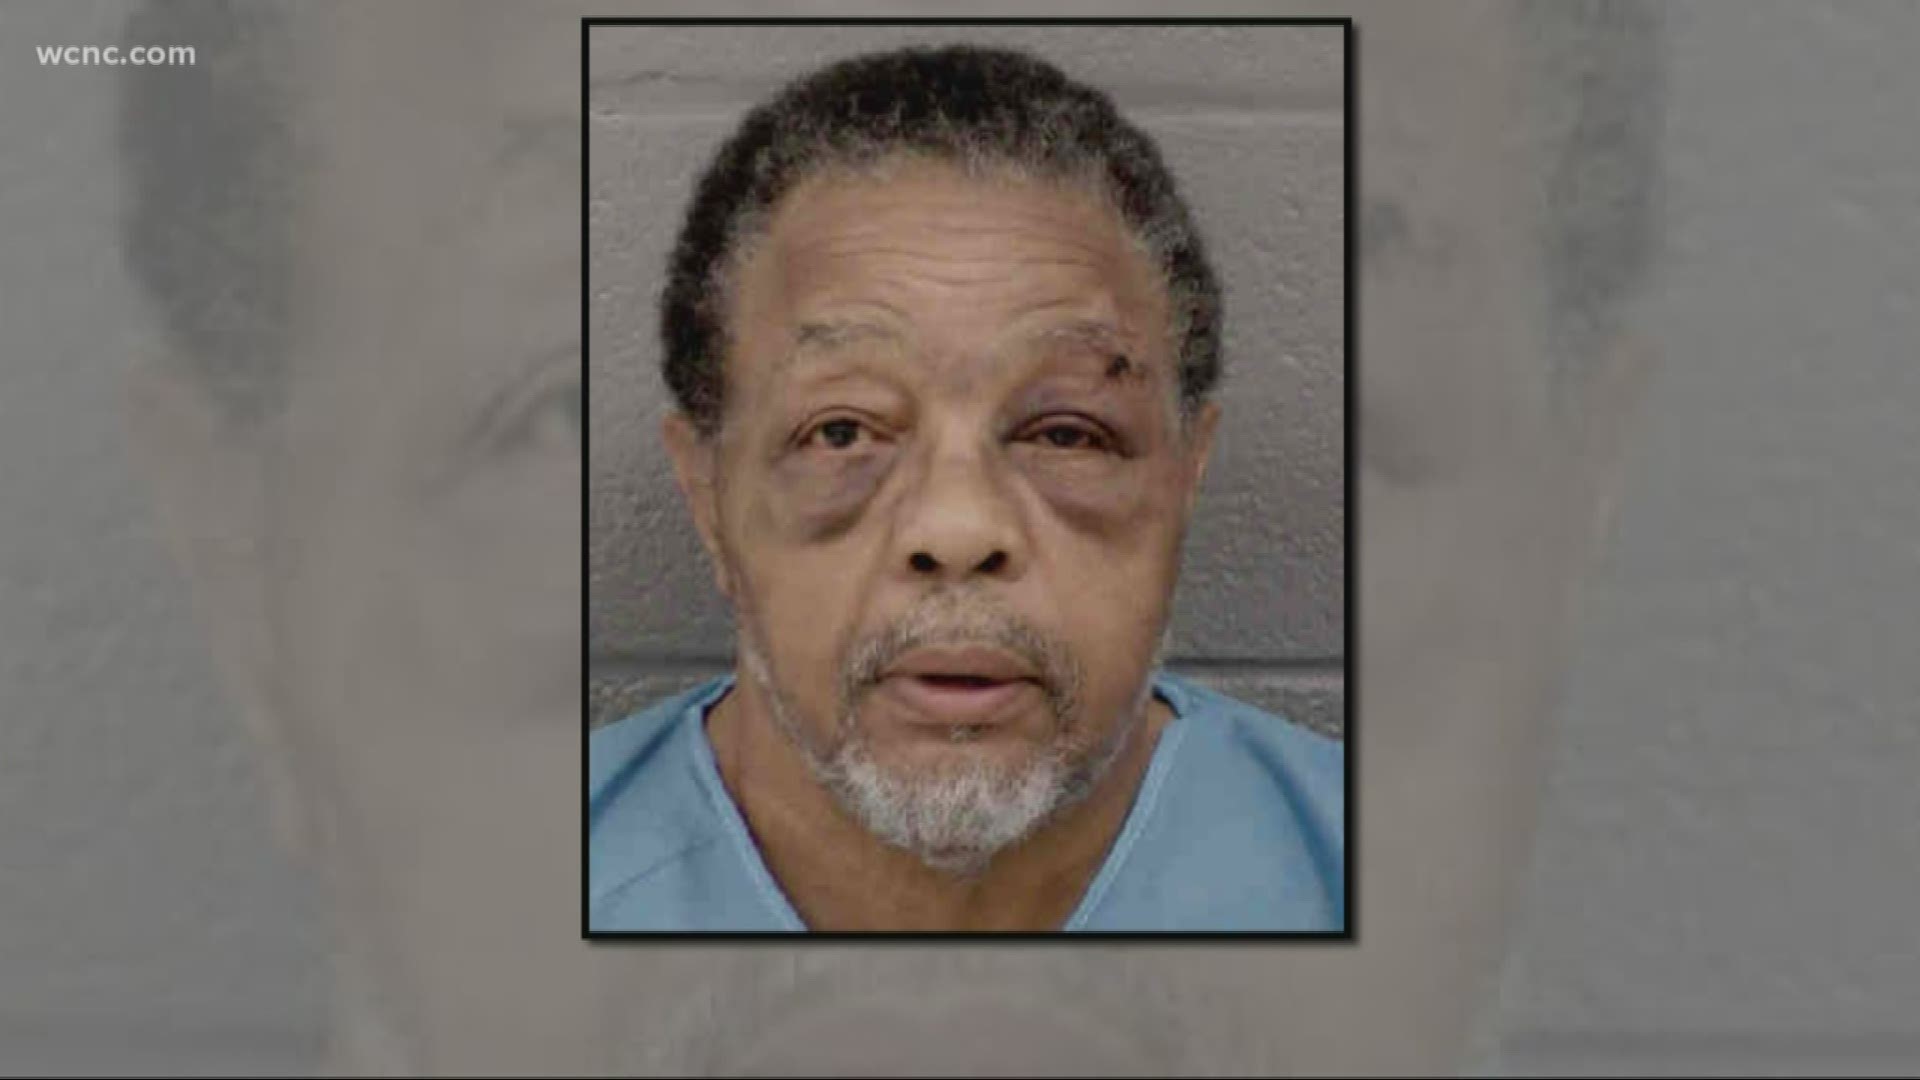 Police say many homicides this year have involved young people, but in this case, a 75-year-old man was charged in two murders.